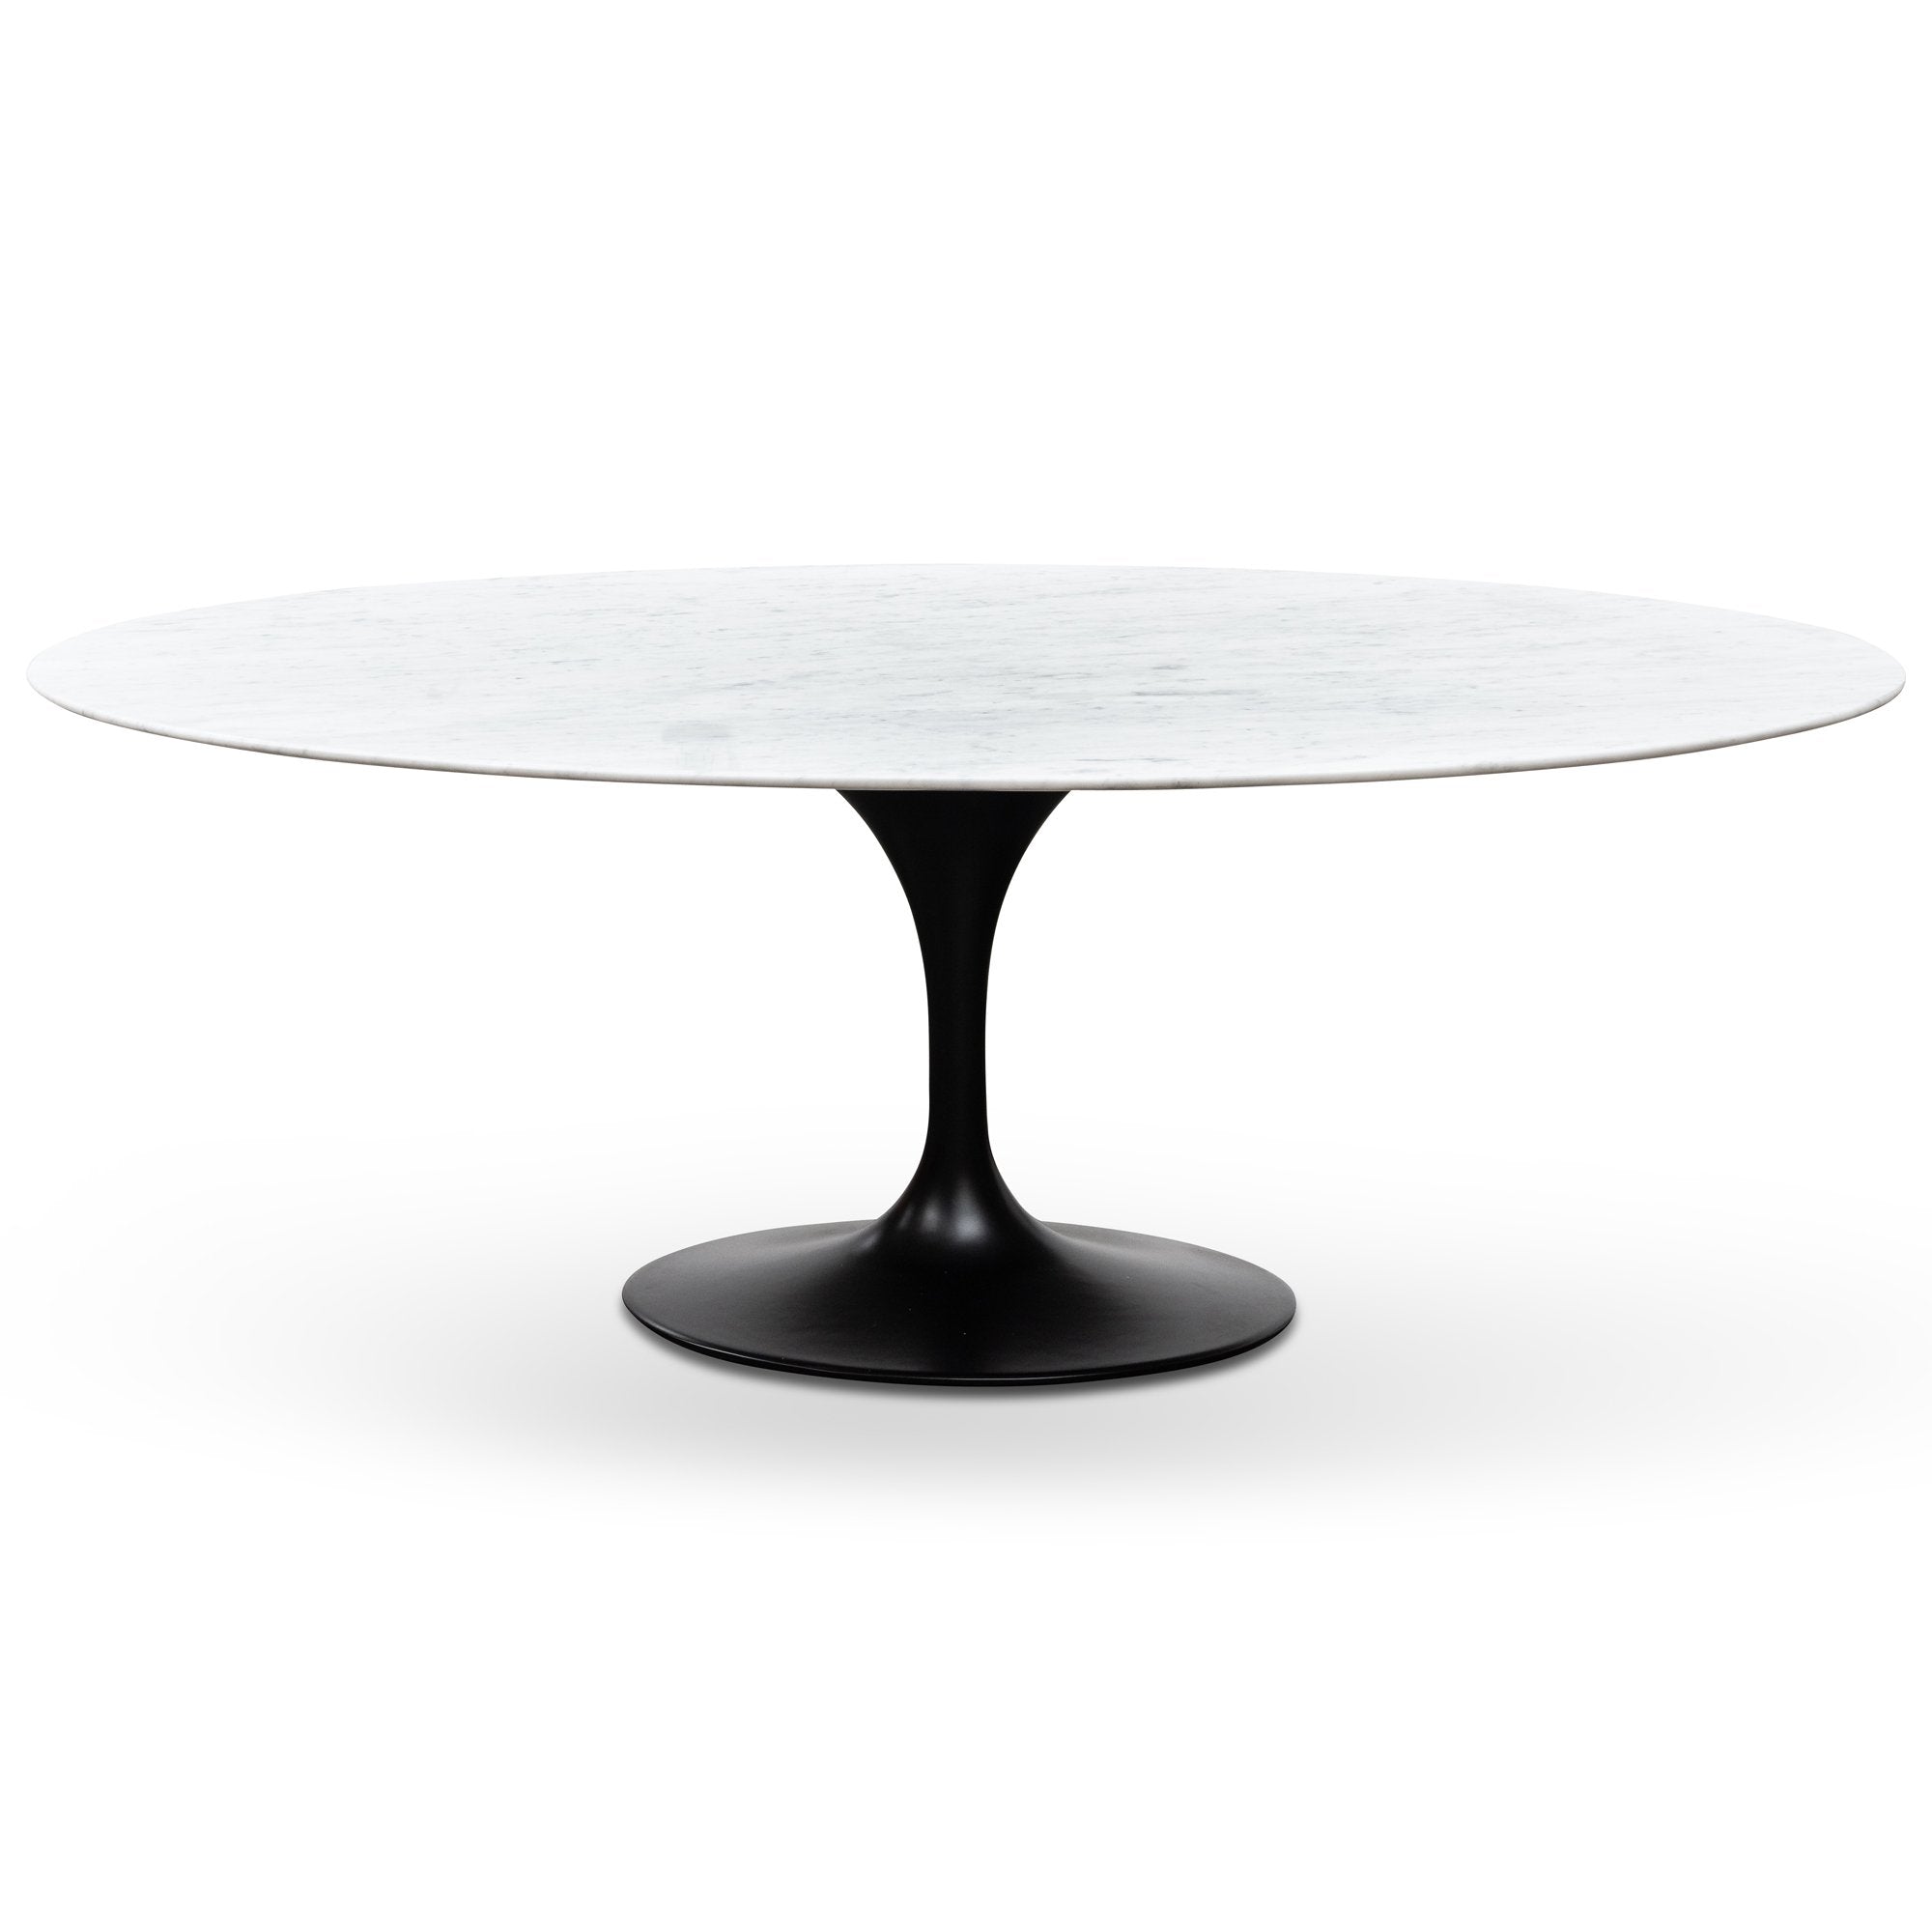 Rose 2m White Marble Oval Dining Table - Black Base - Dining Tables